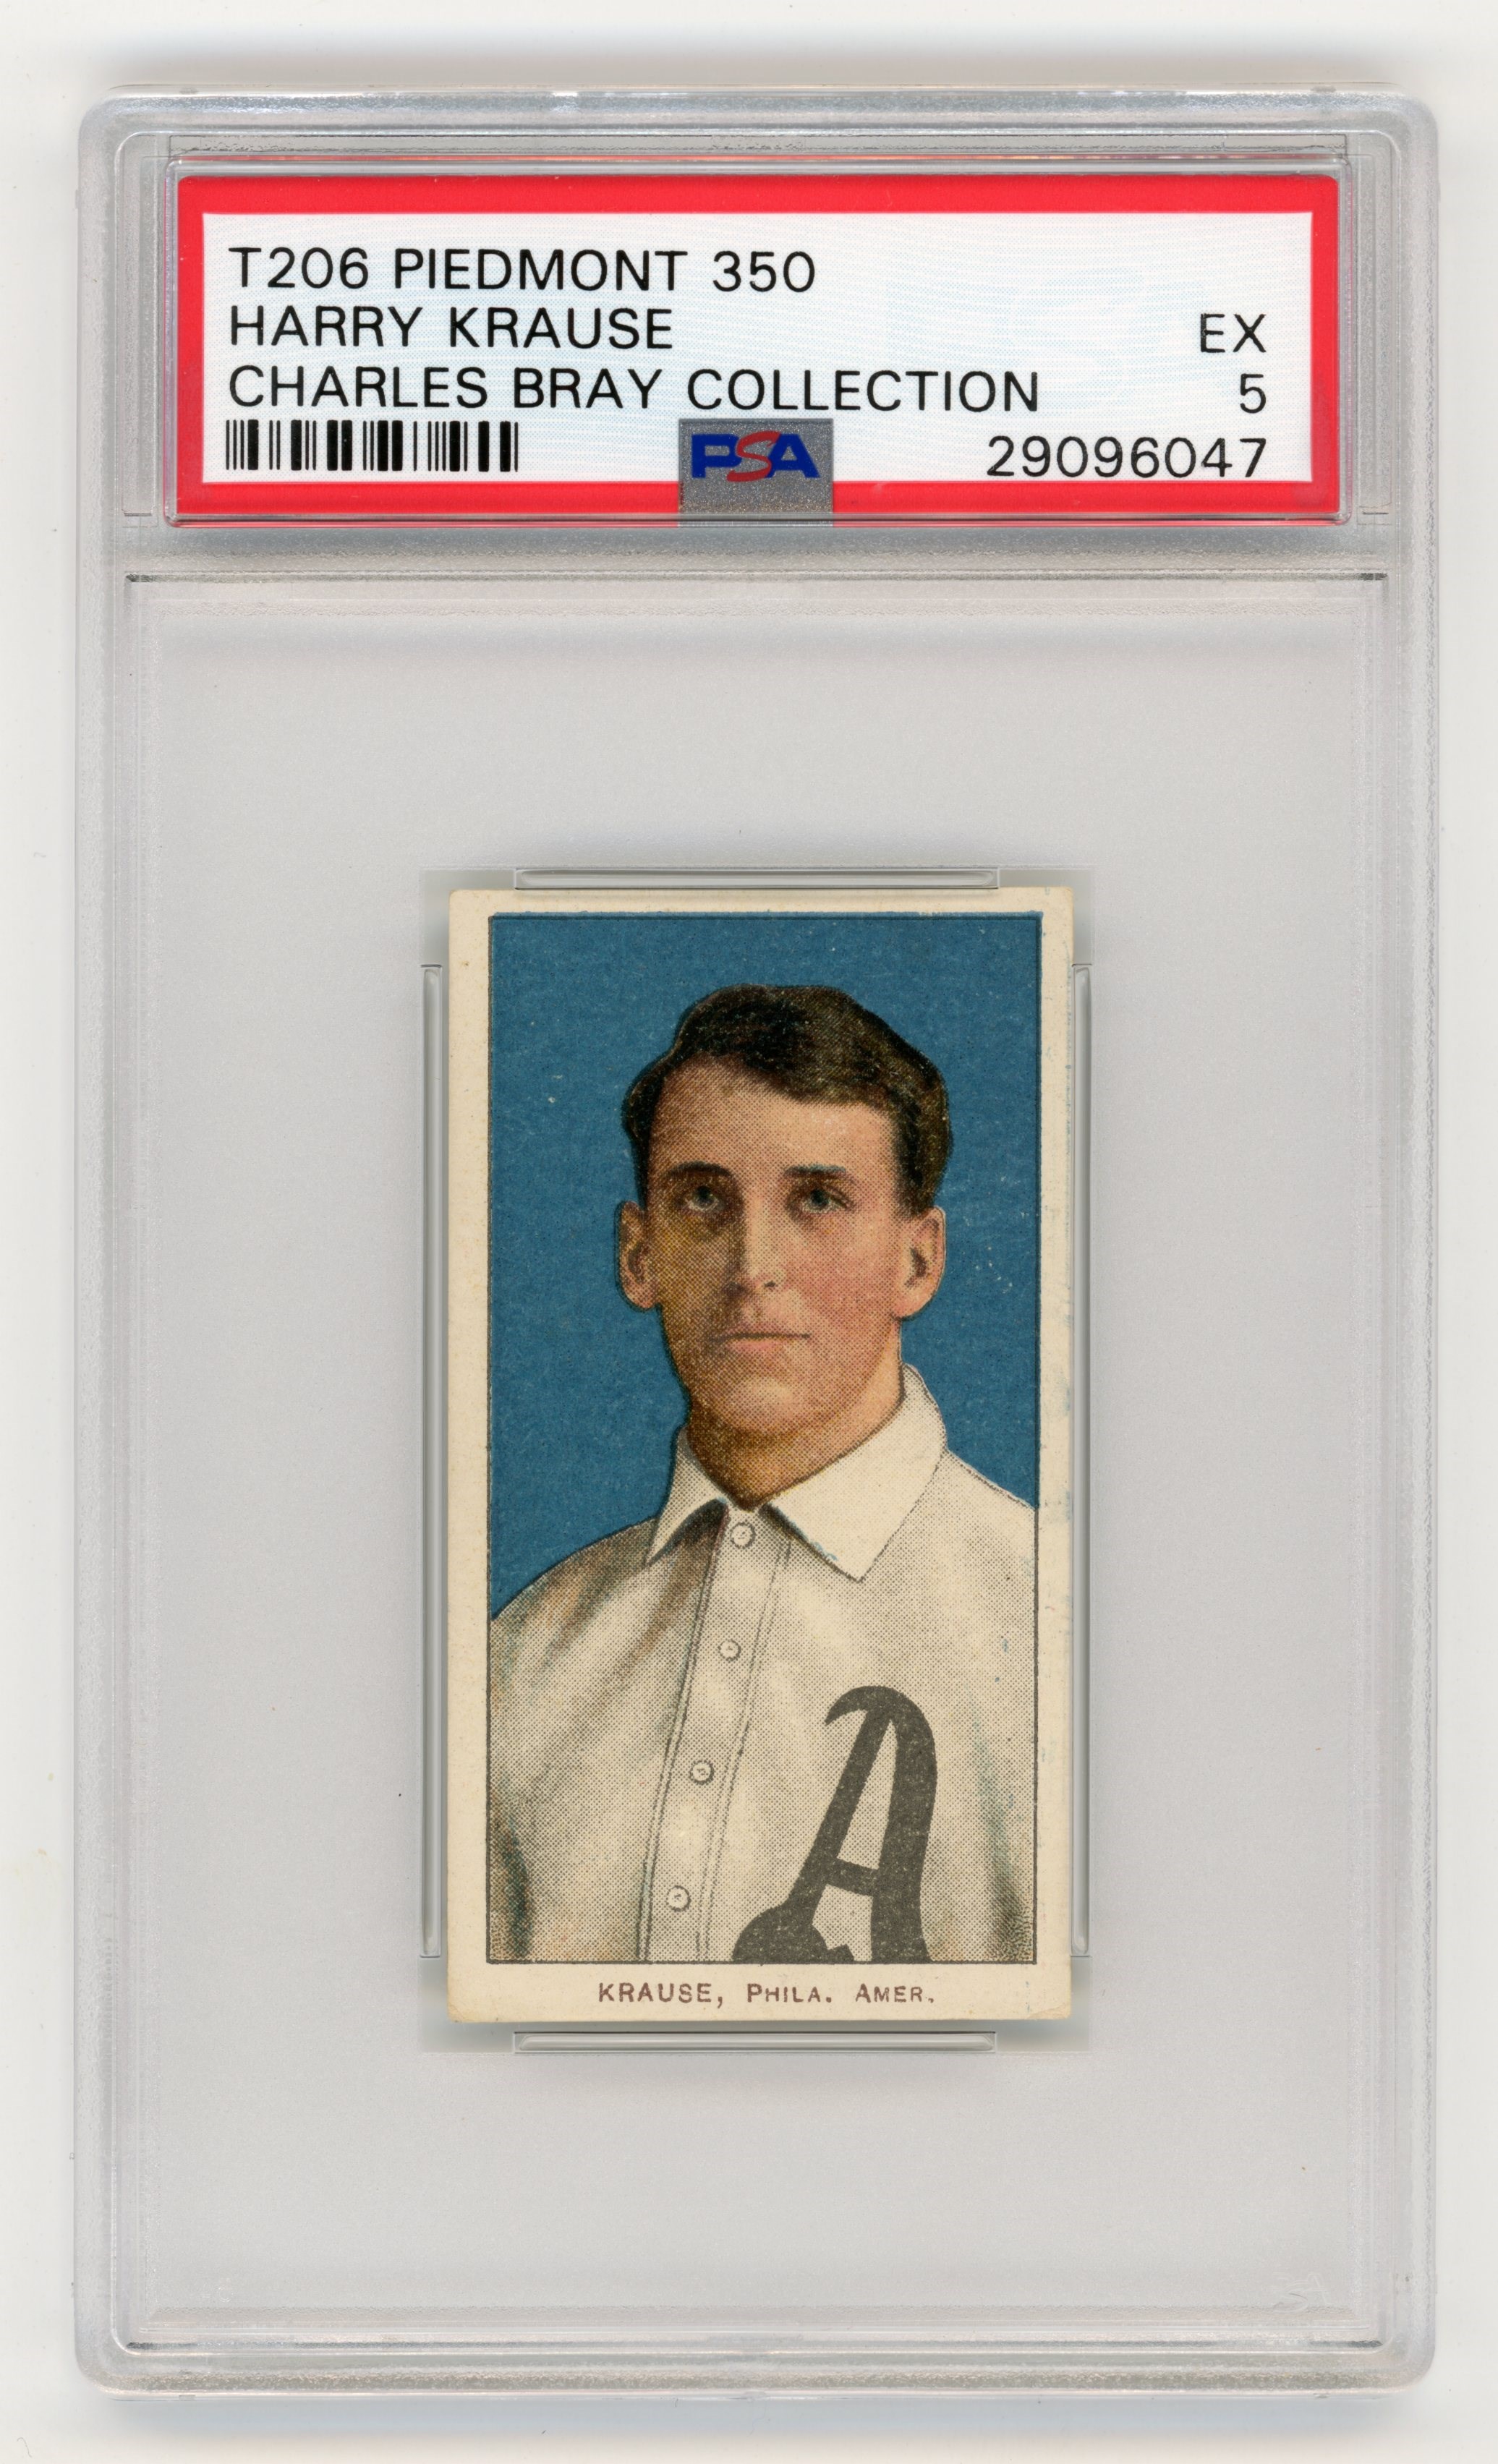 Baseball and Trading Cards - T206 Piedmont 350 Harry Krause PSA 5 From The Charles Bray Collection